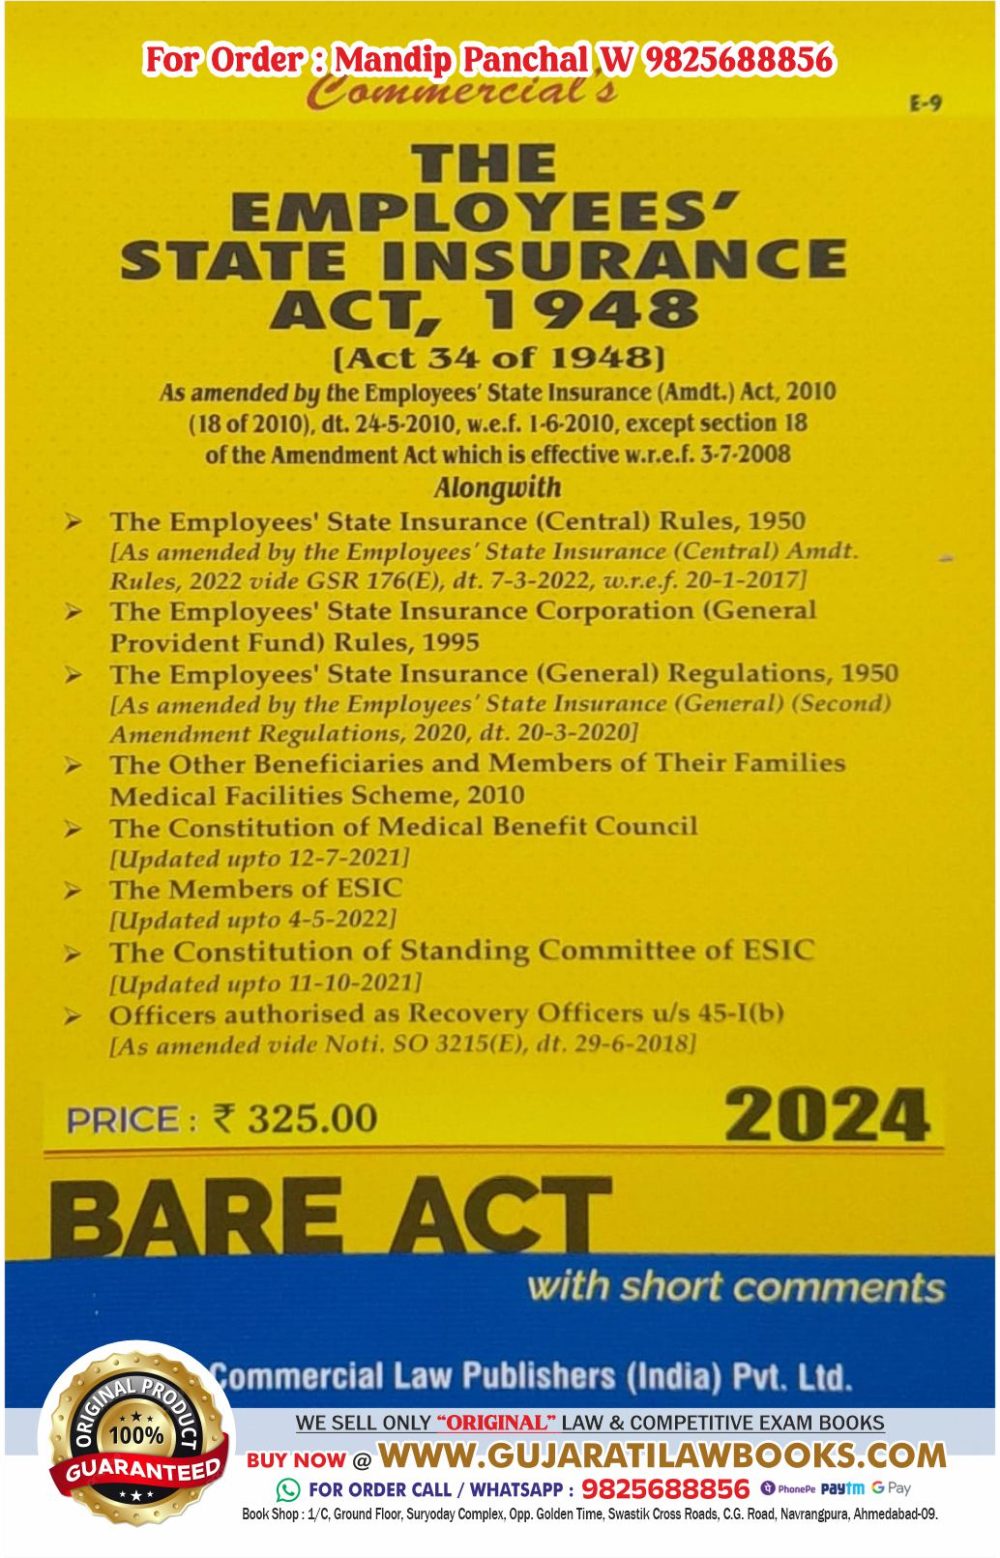 ESI - Employees State Insurance Act, 1948 - BARE ACT - Latest 2024 Edition Commercial